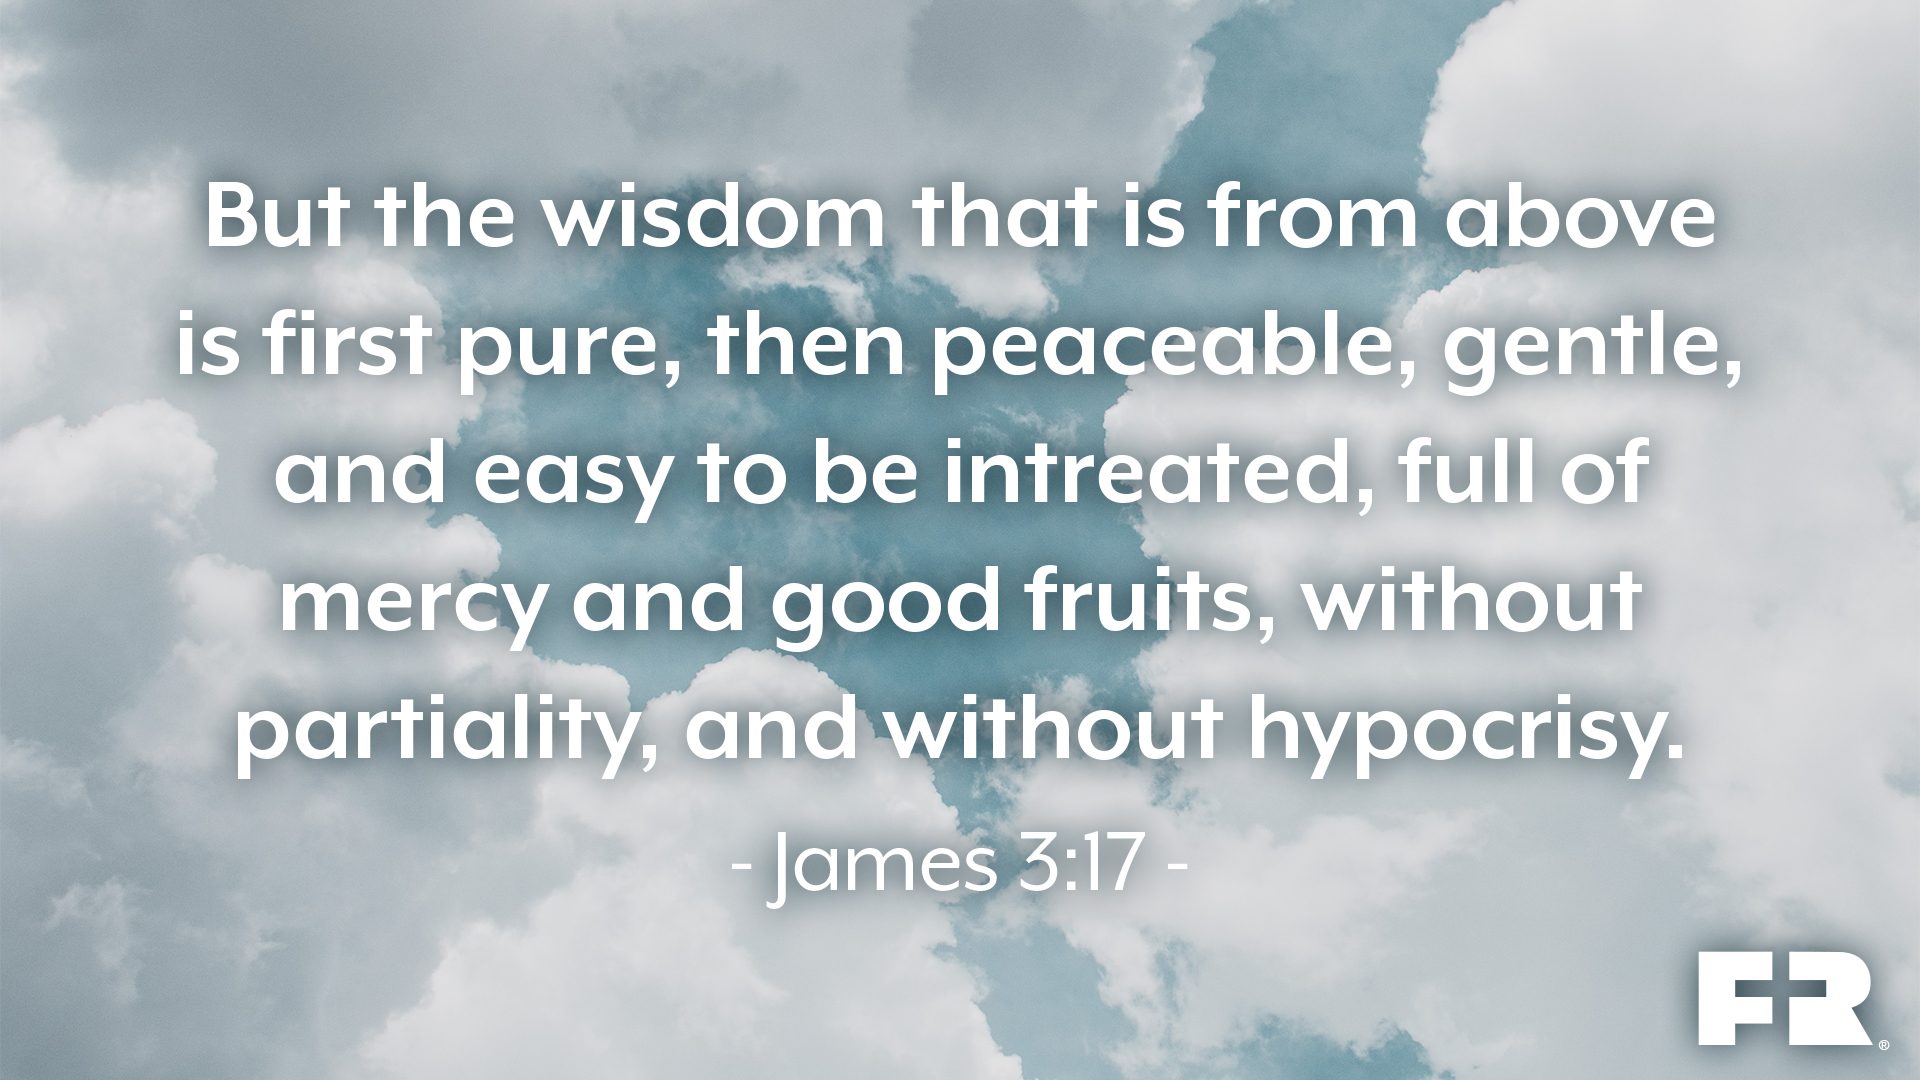 “But the wisdom that is from above is first pure, then peaceable, gentle, and easy to be intreated, full of mercy and good fruits, without partiality, and without hypocrisy.”